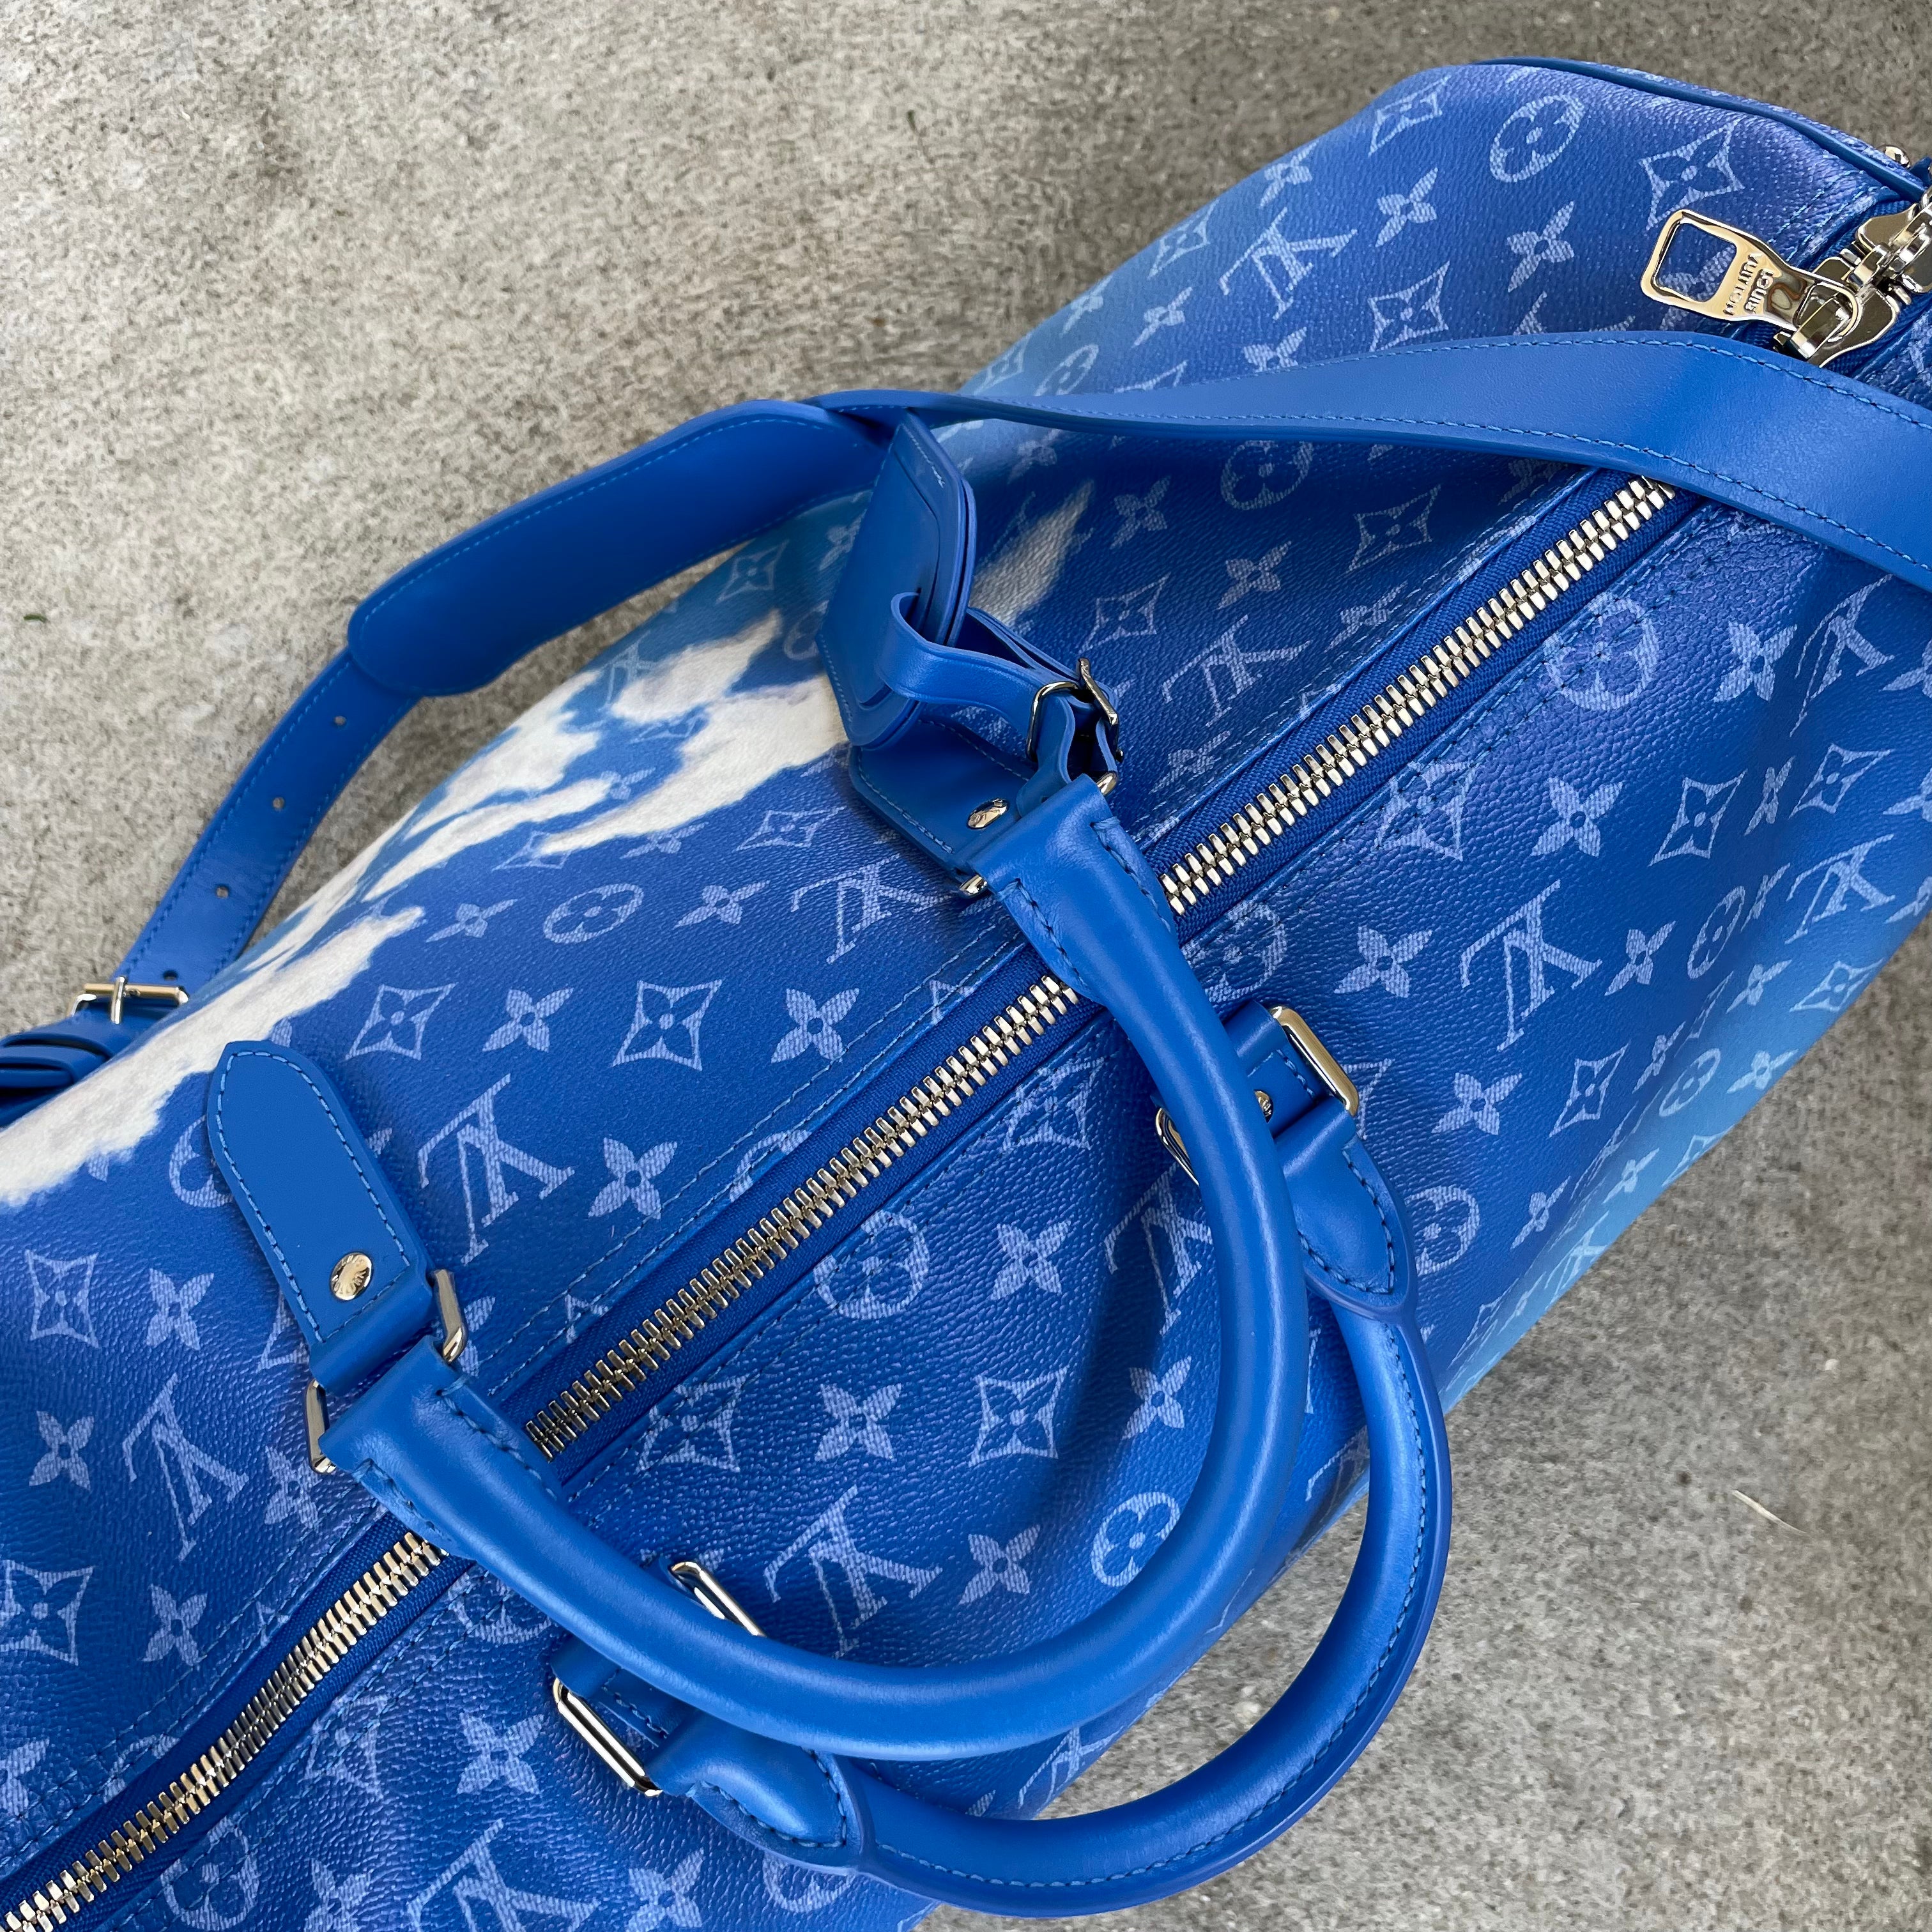 Louis Vuitton Virgil Abloh Monogram Cloud Keepall 50 – Curated by Charbel